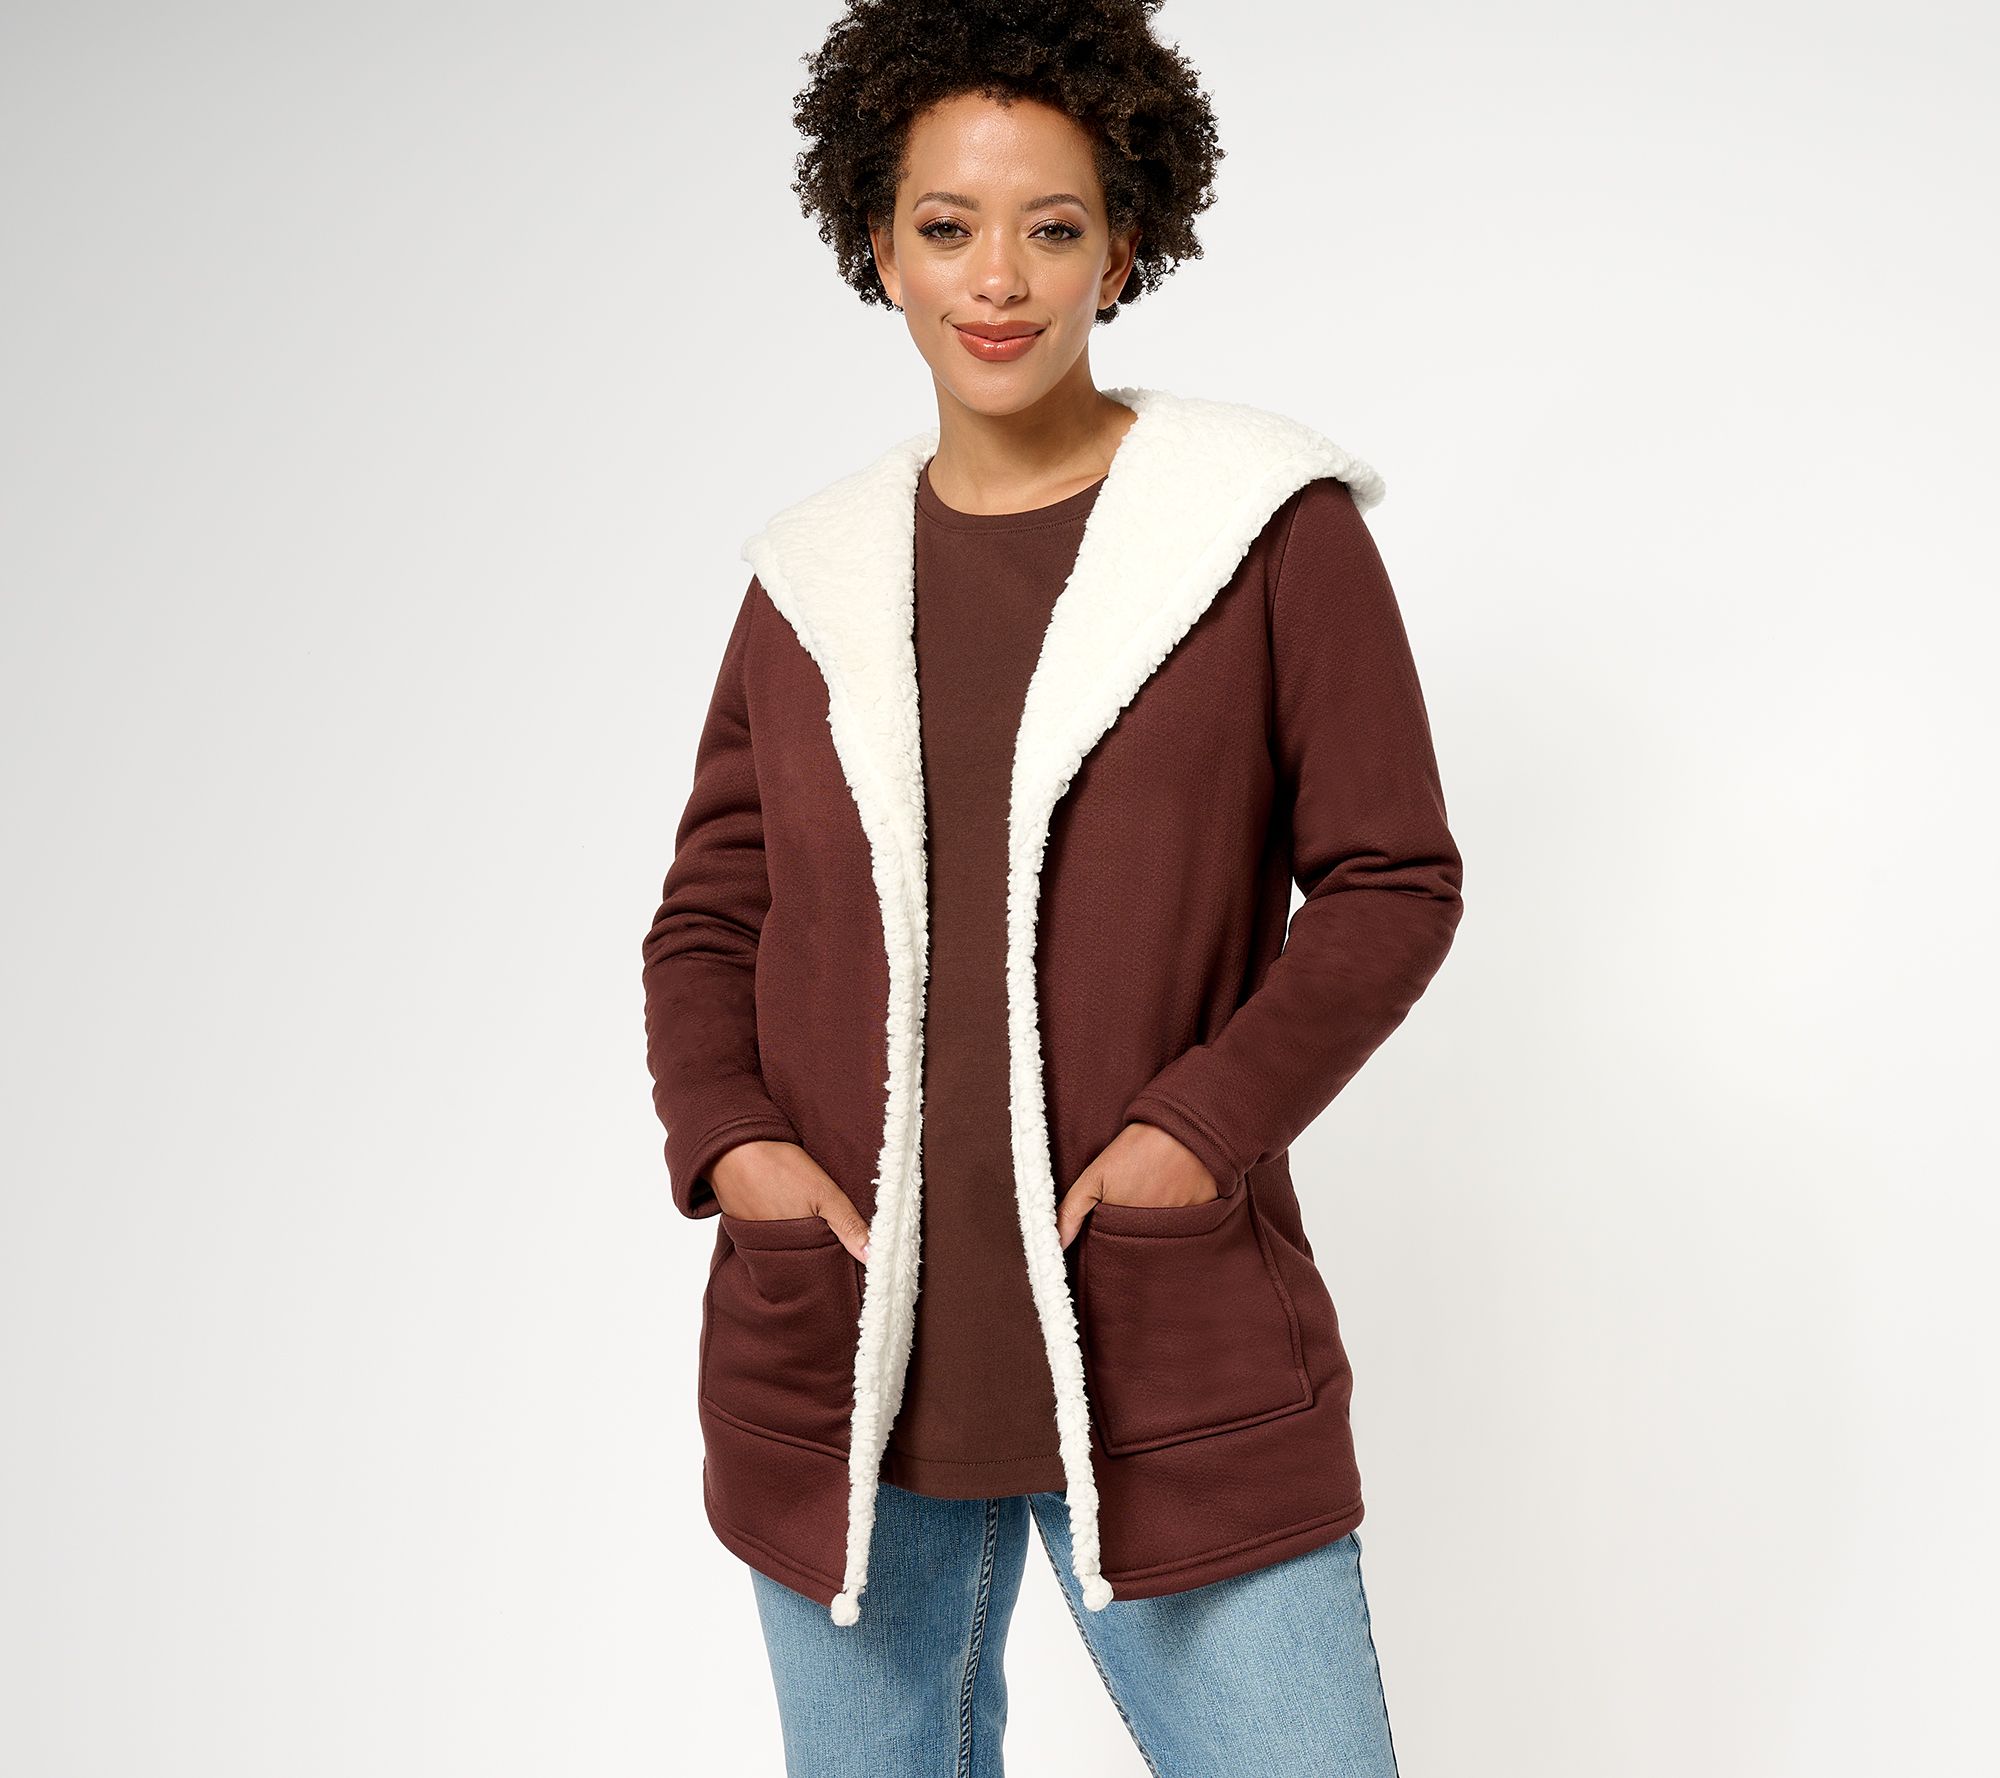 Denim & Co. Sherpa Bonded Hooded Jacket with Pockets - QVC.com